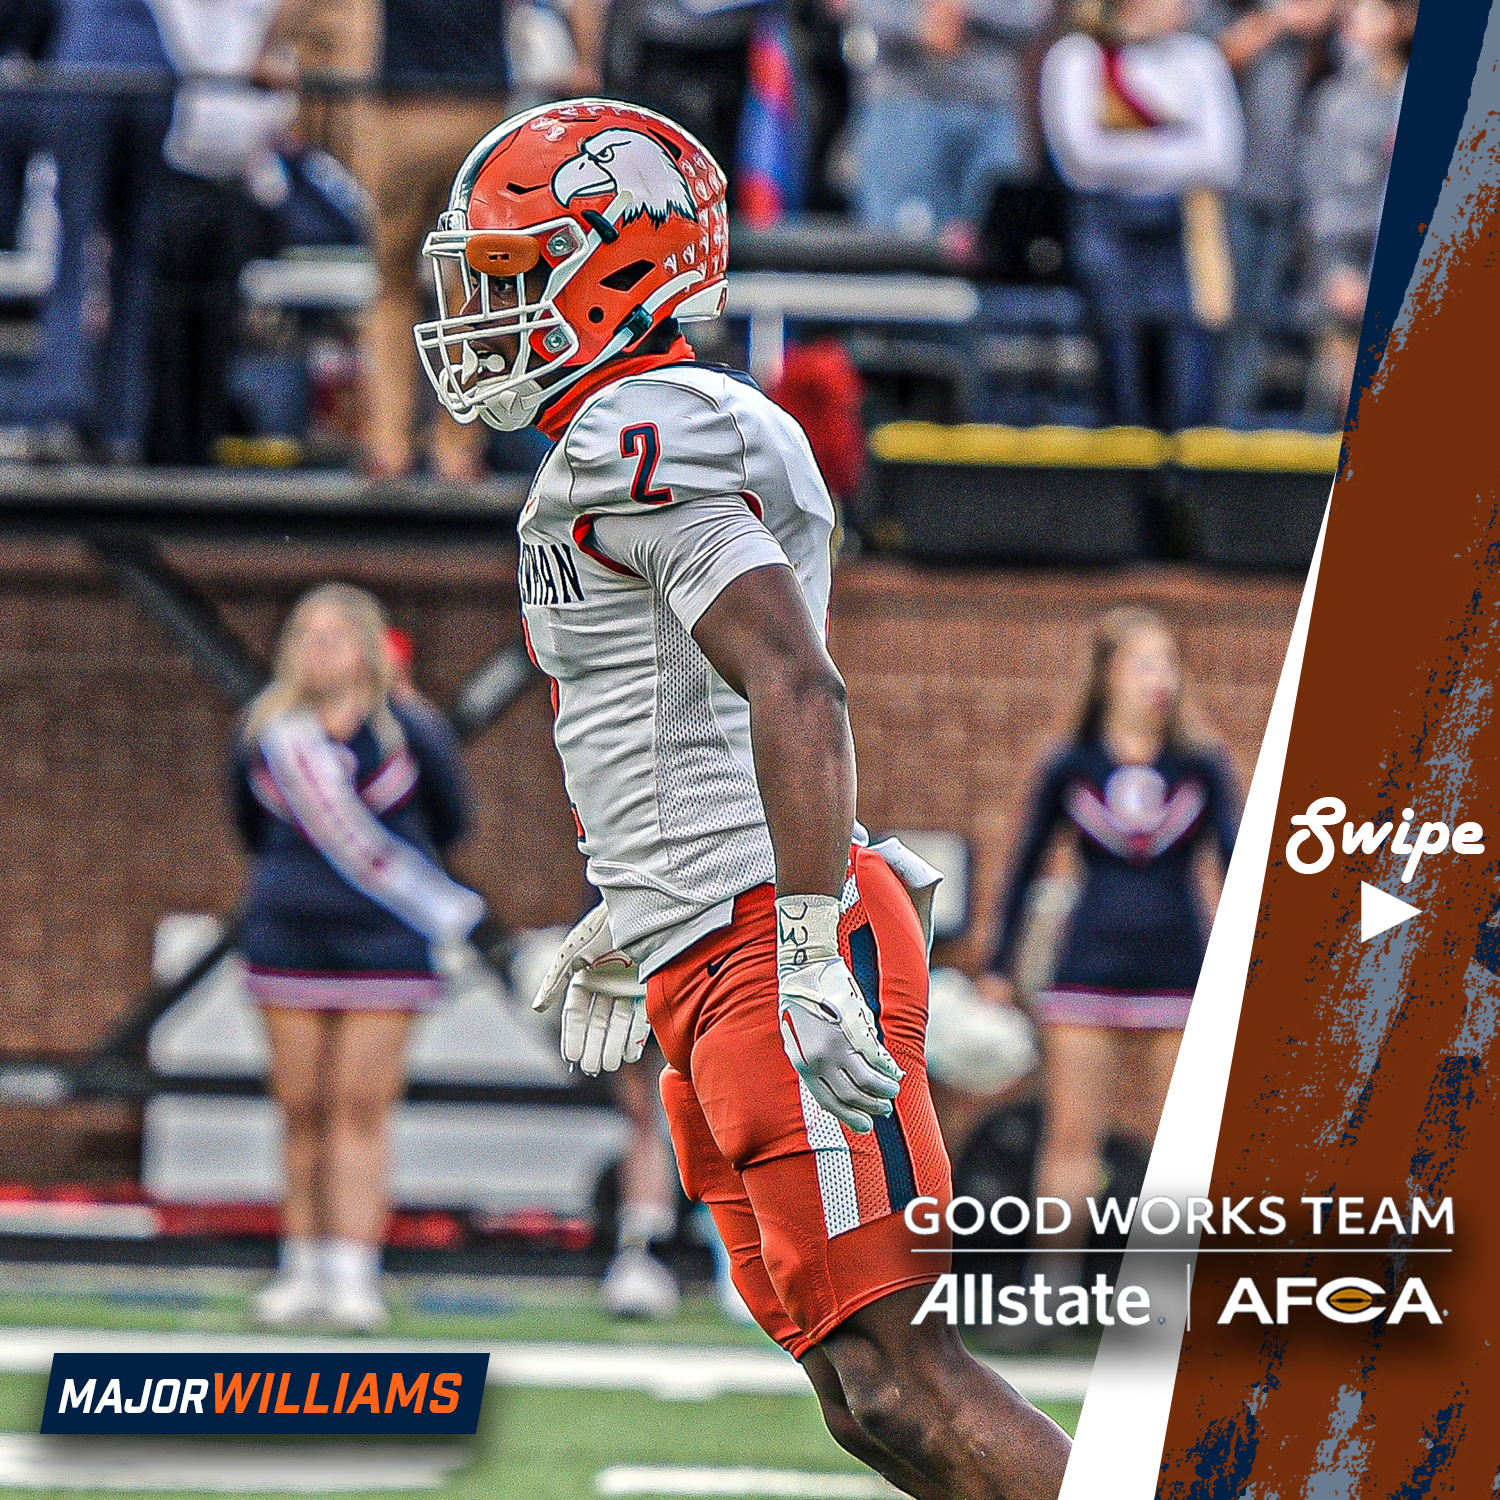 Williams, Clowney nominated for Allstate AFCA Good Works Team